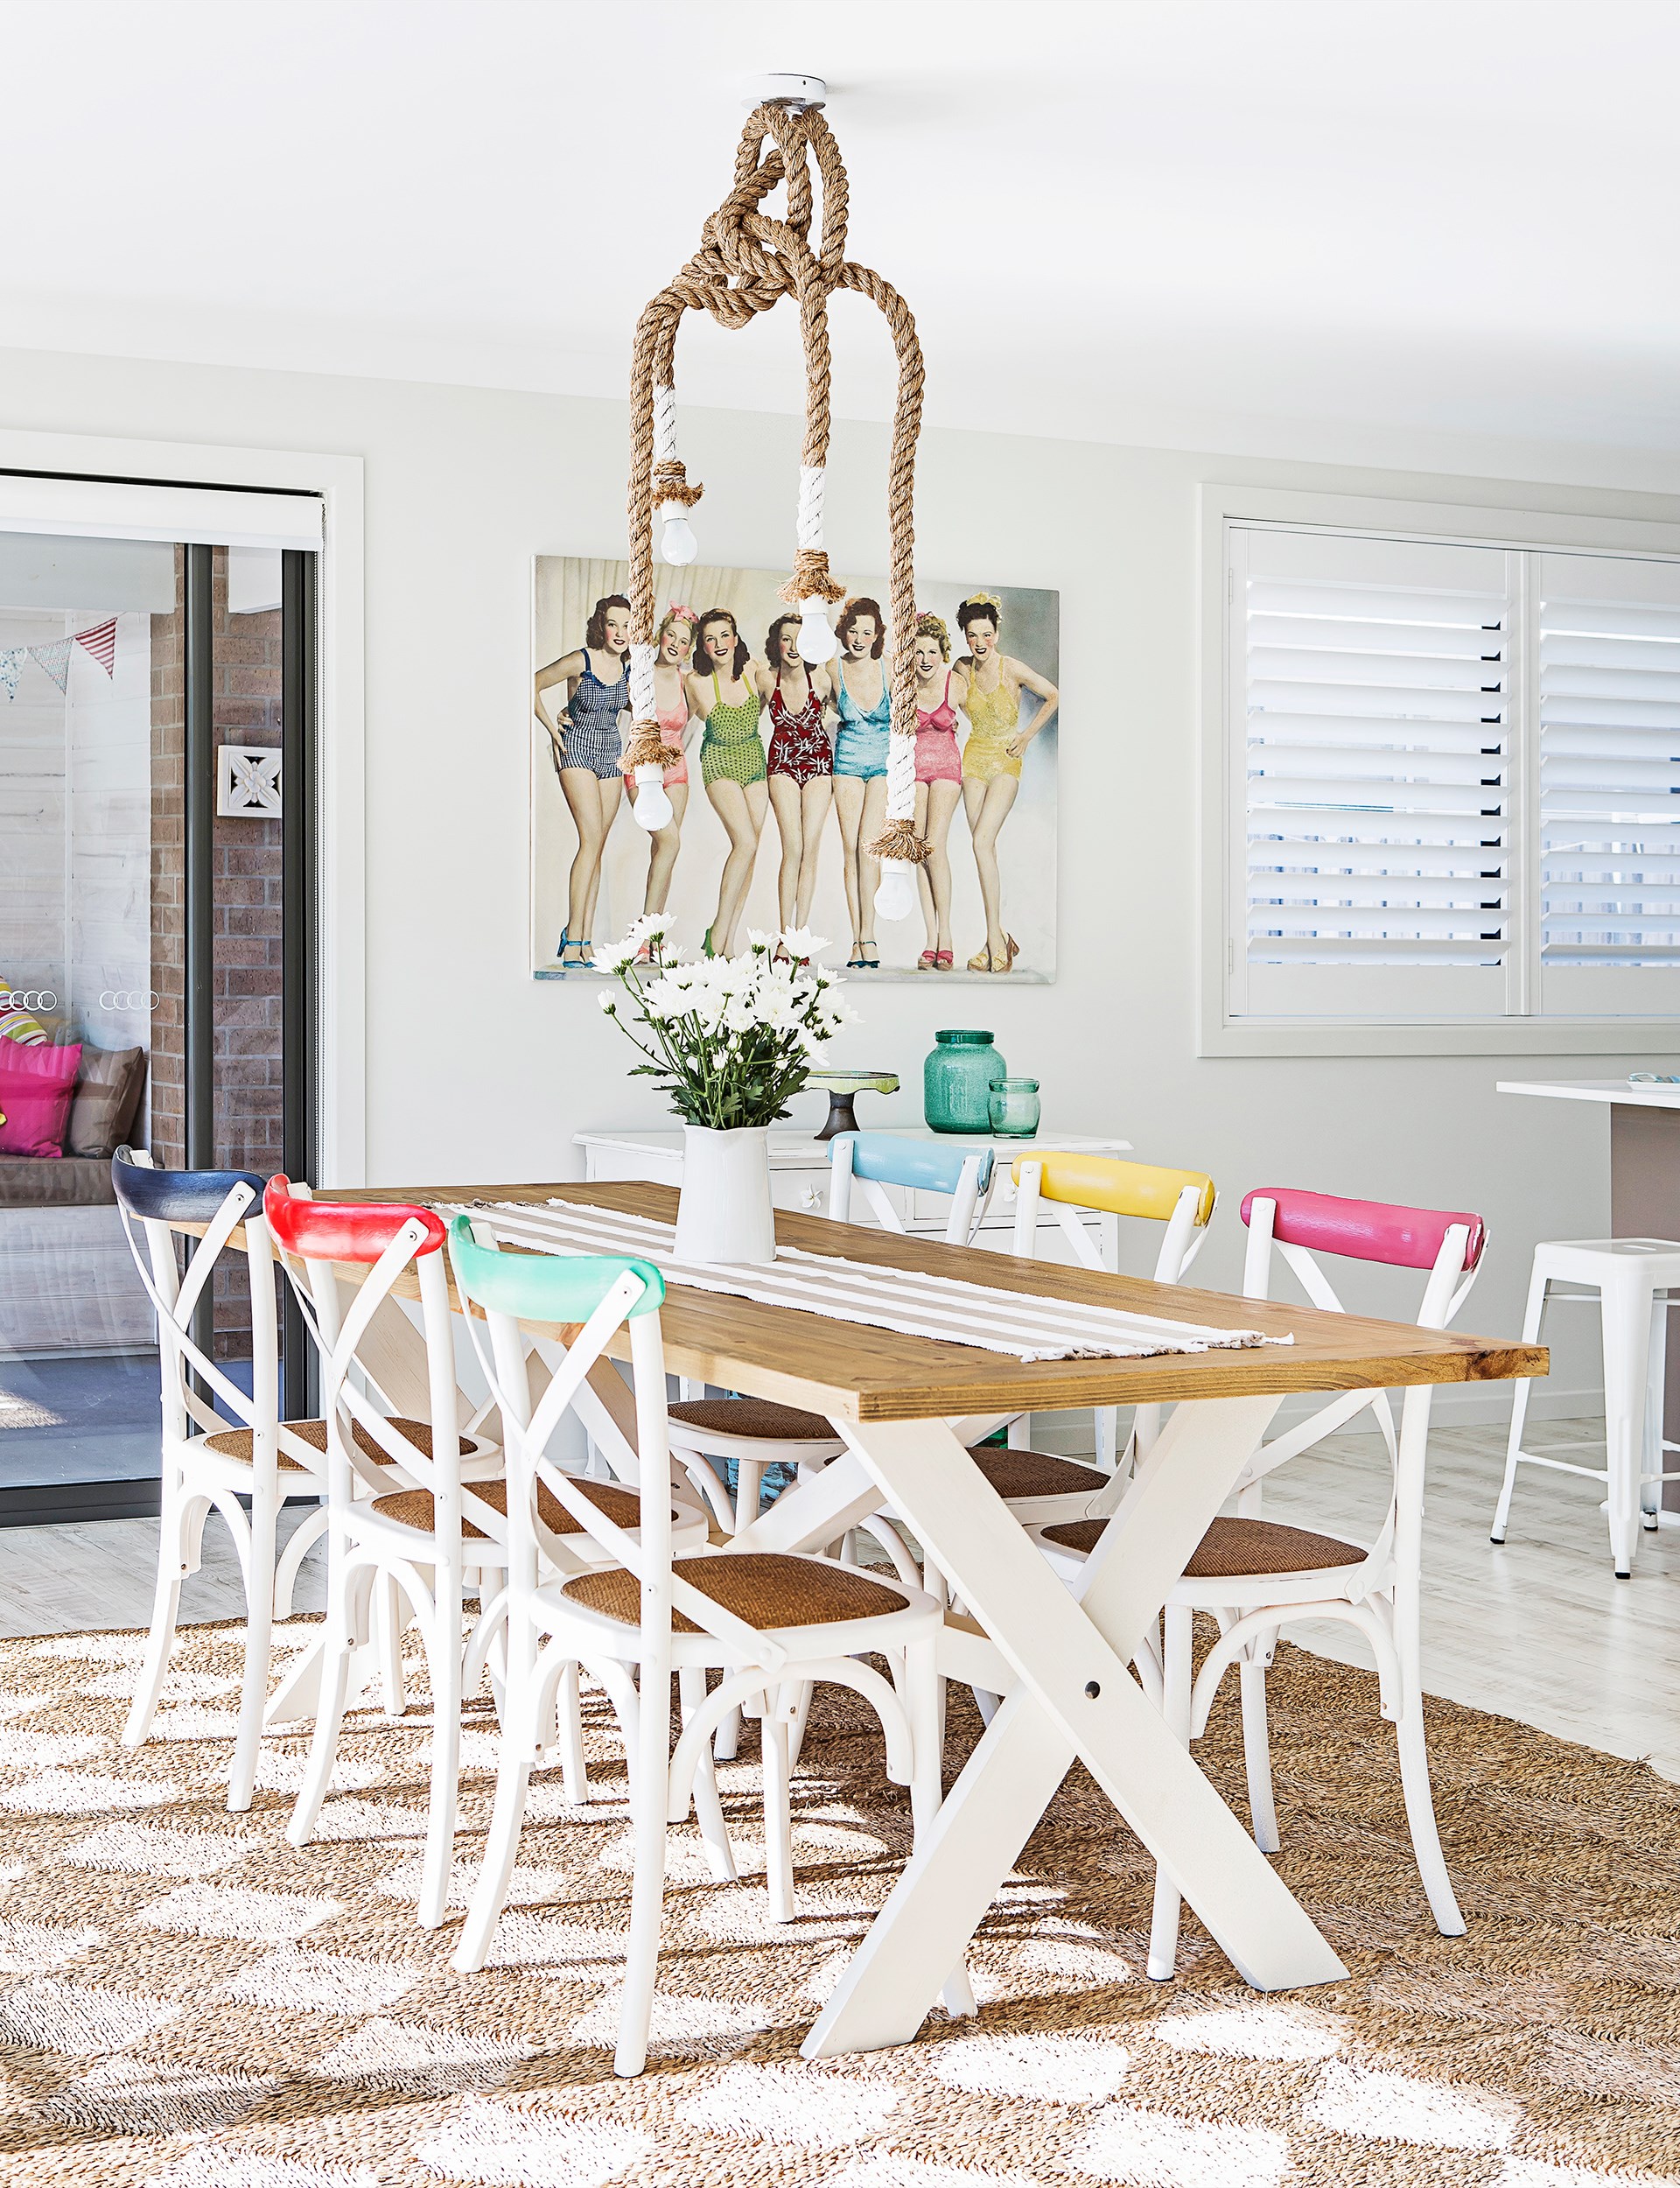 A rope pendant light from [Freedom](http://www.freedom.com.au/?utm_campaign=supplier/|target="_blank") adds to the beachy vibes of this fresh, fun dining area. Take the tour of this [coastal-style overhaul of a single storey home](http://www.homestolove.com.au/empty-nesters-embrace-coastal-style-2918|target="_blank"). Photo: Maree Homer / *homes+*